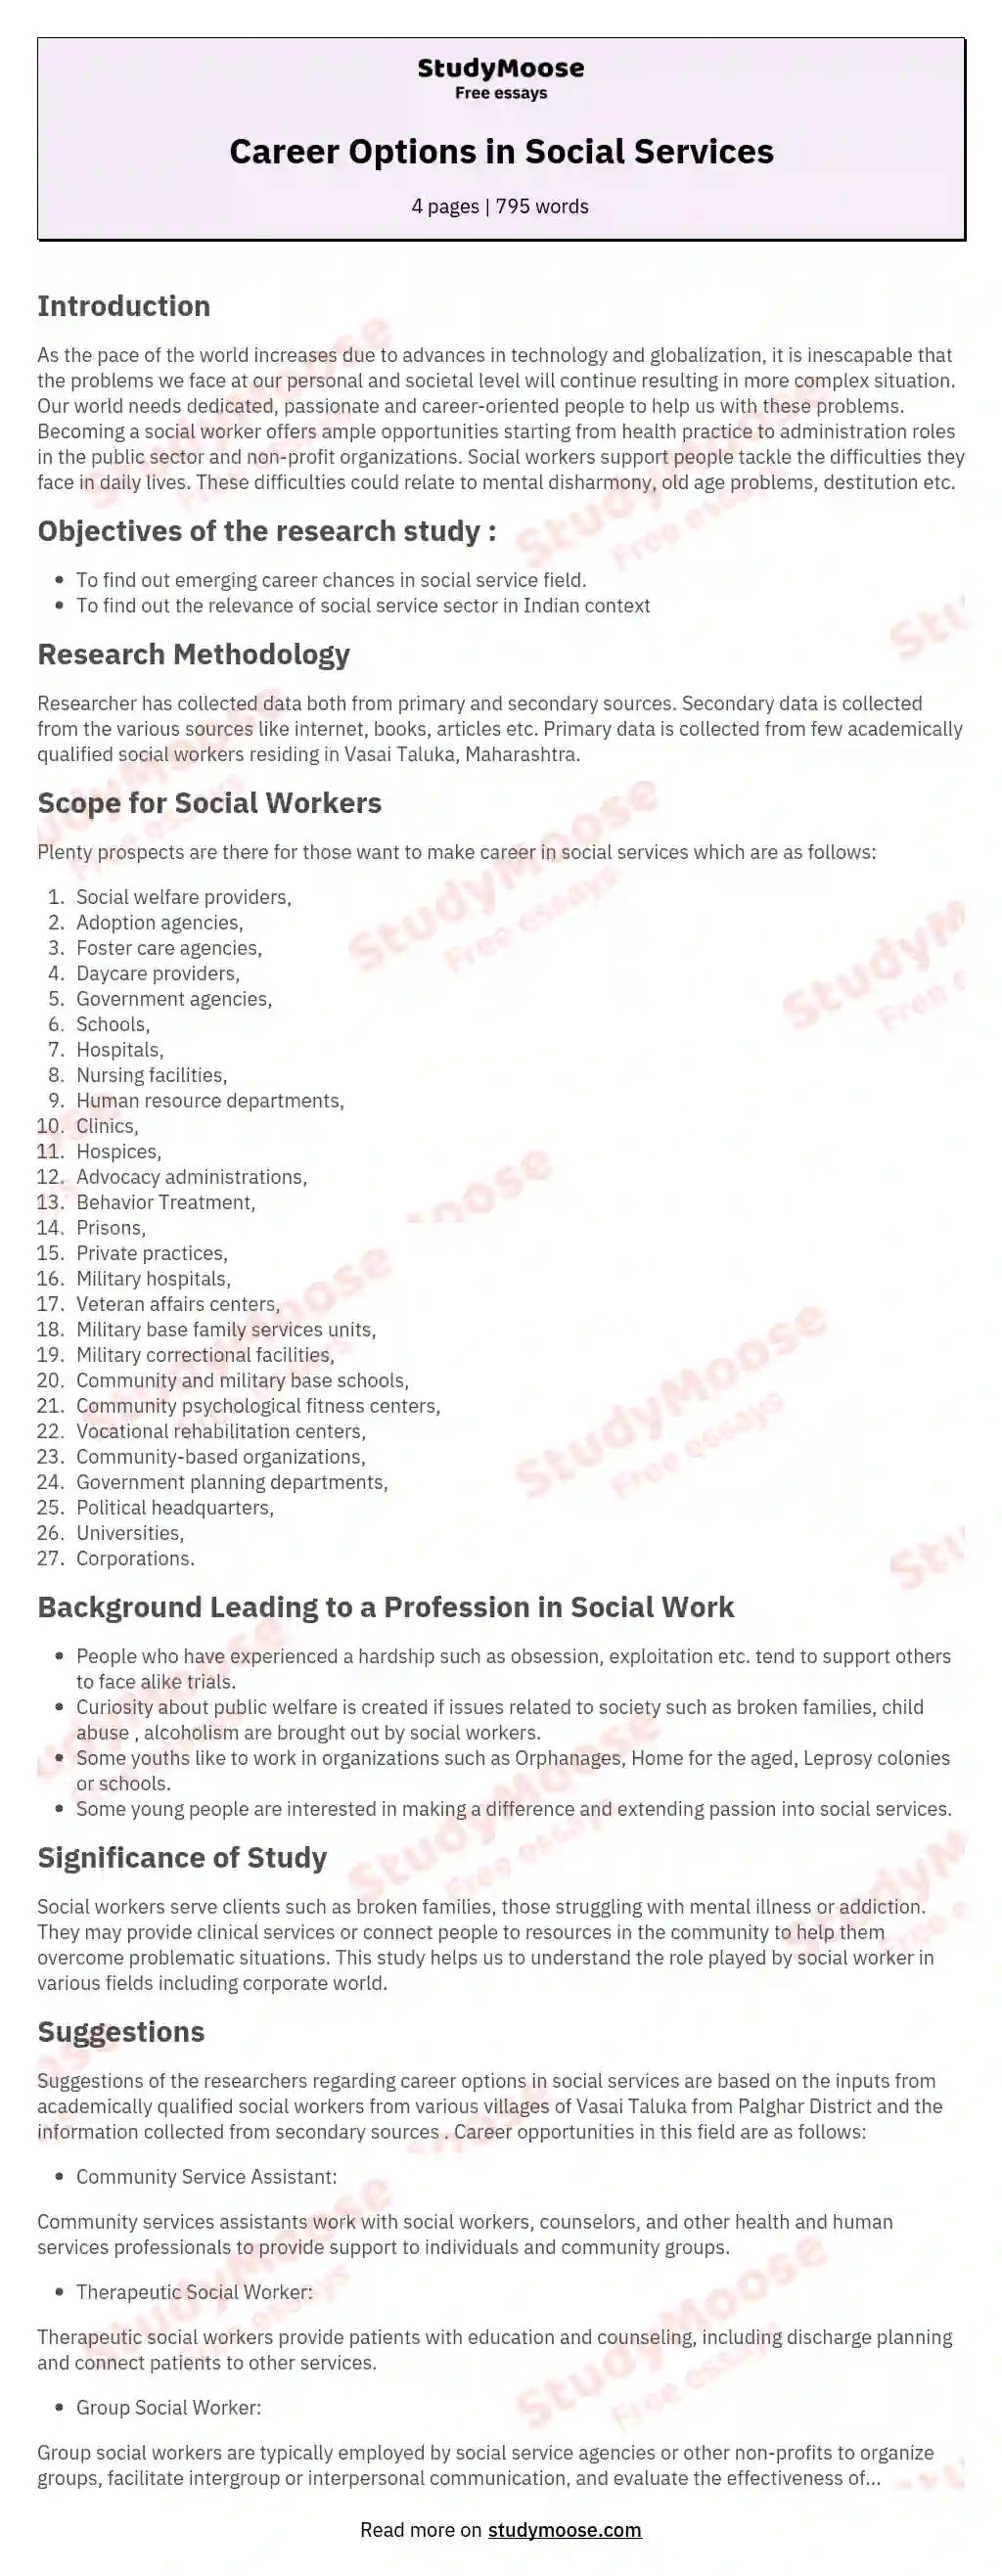 Career Options in Social Services essay